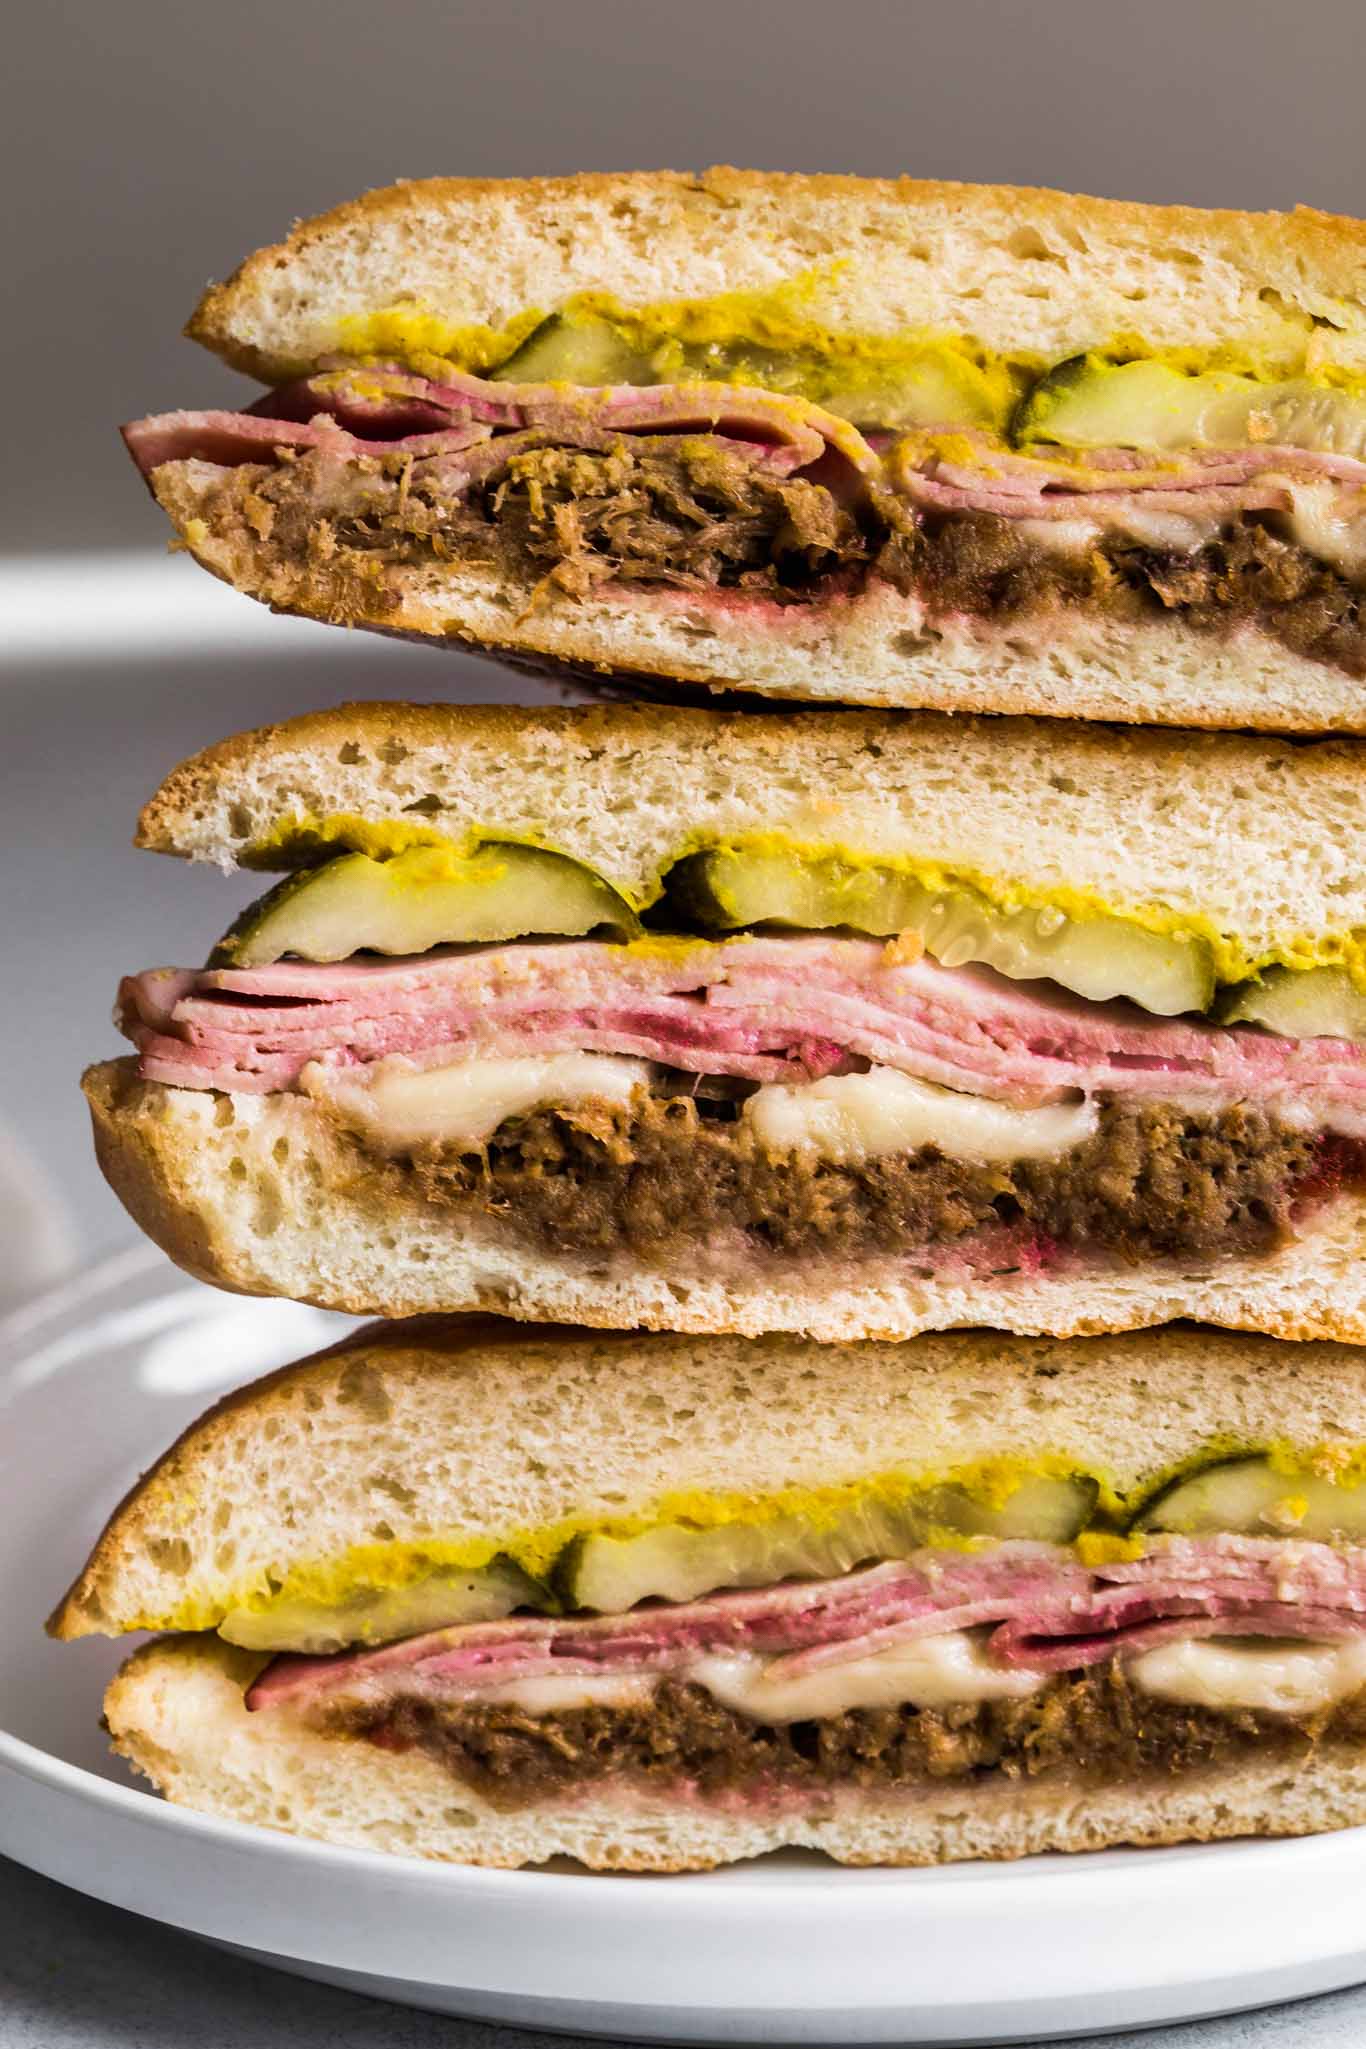 Stack of cubano sandwiches.